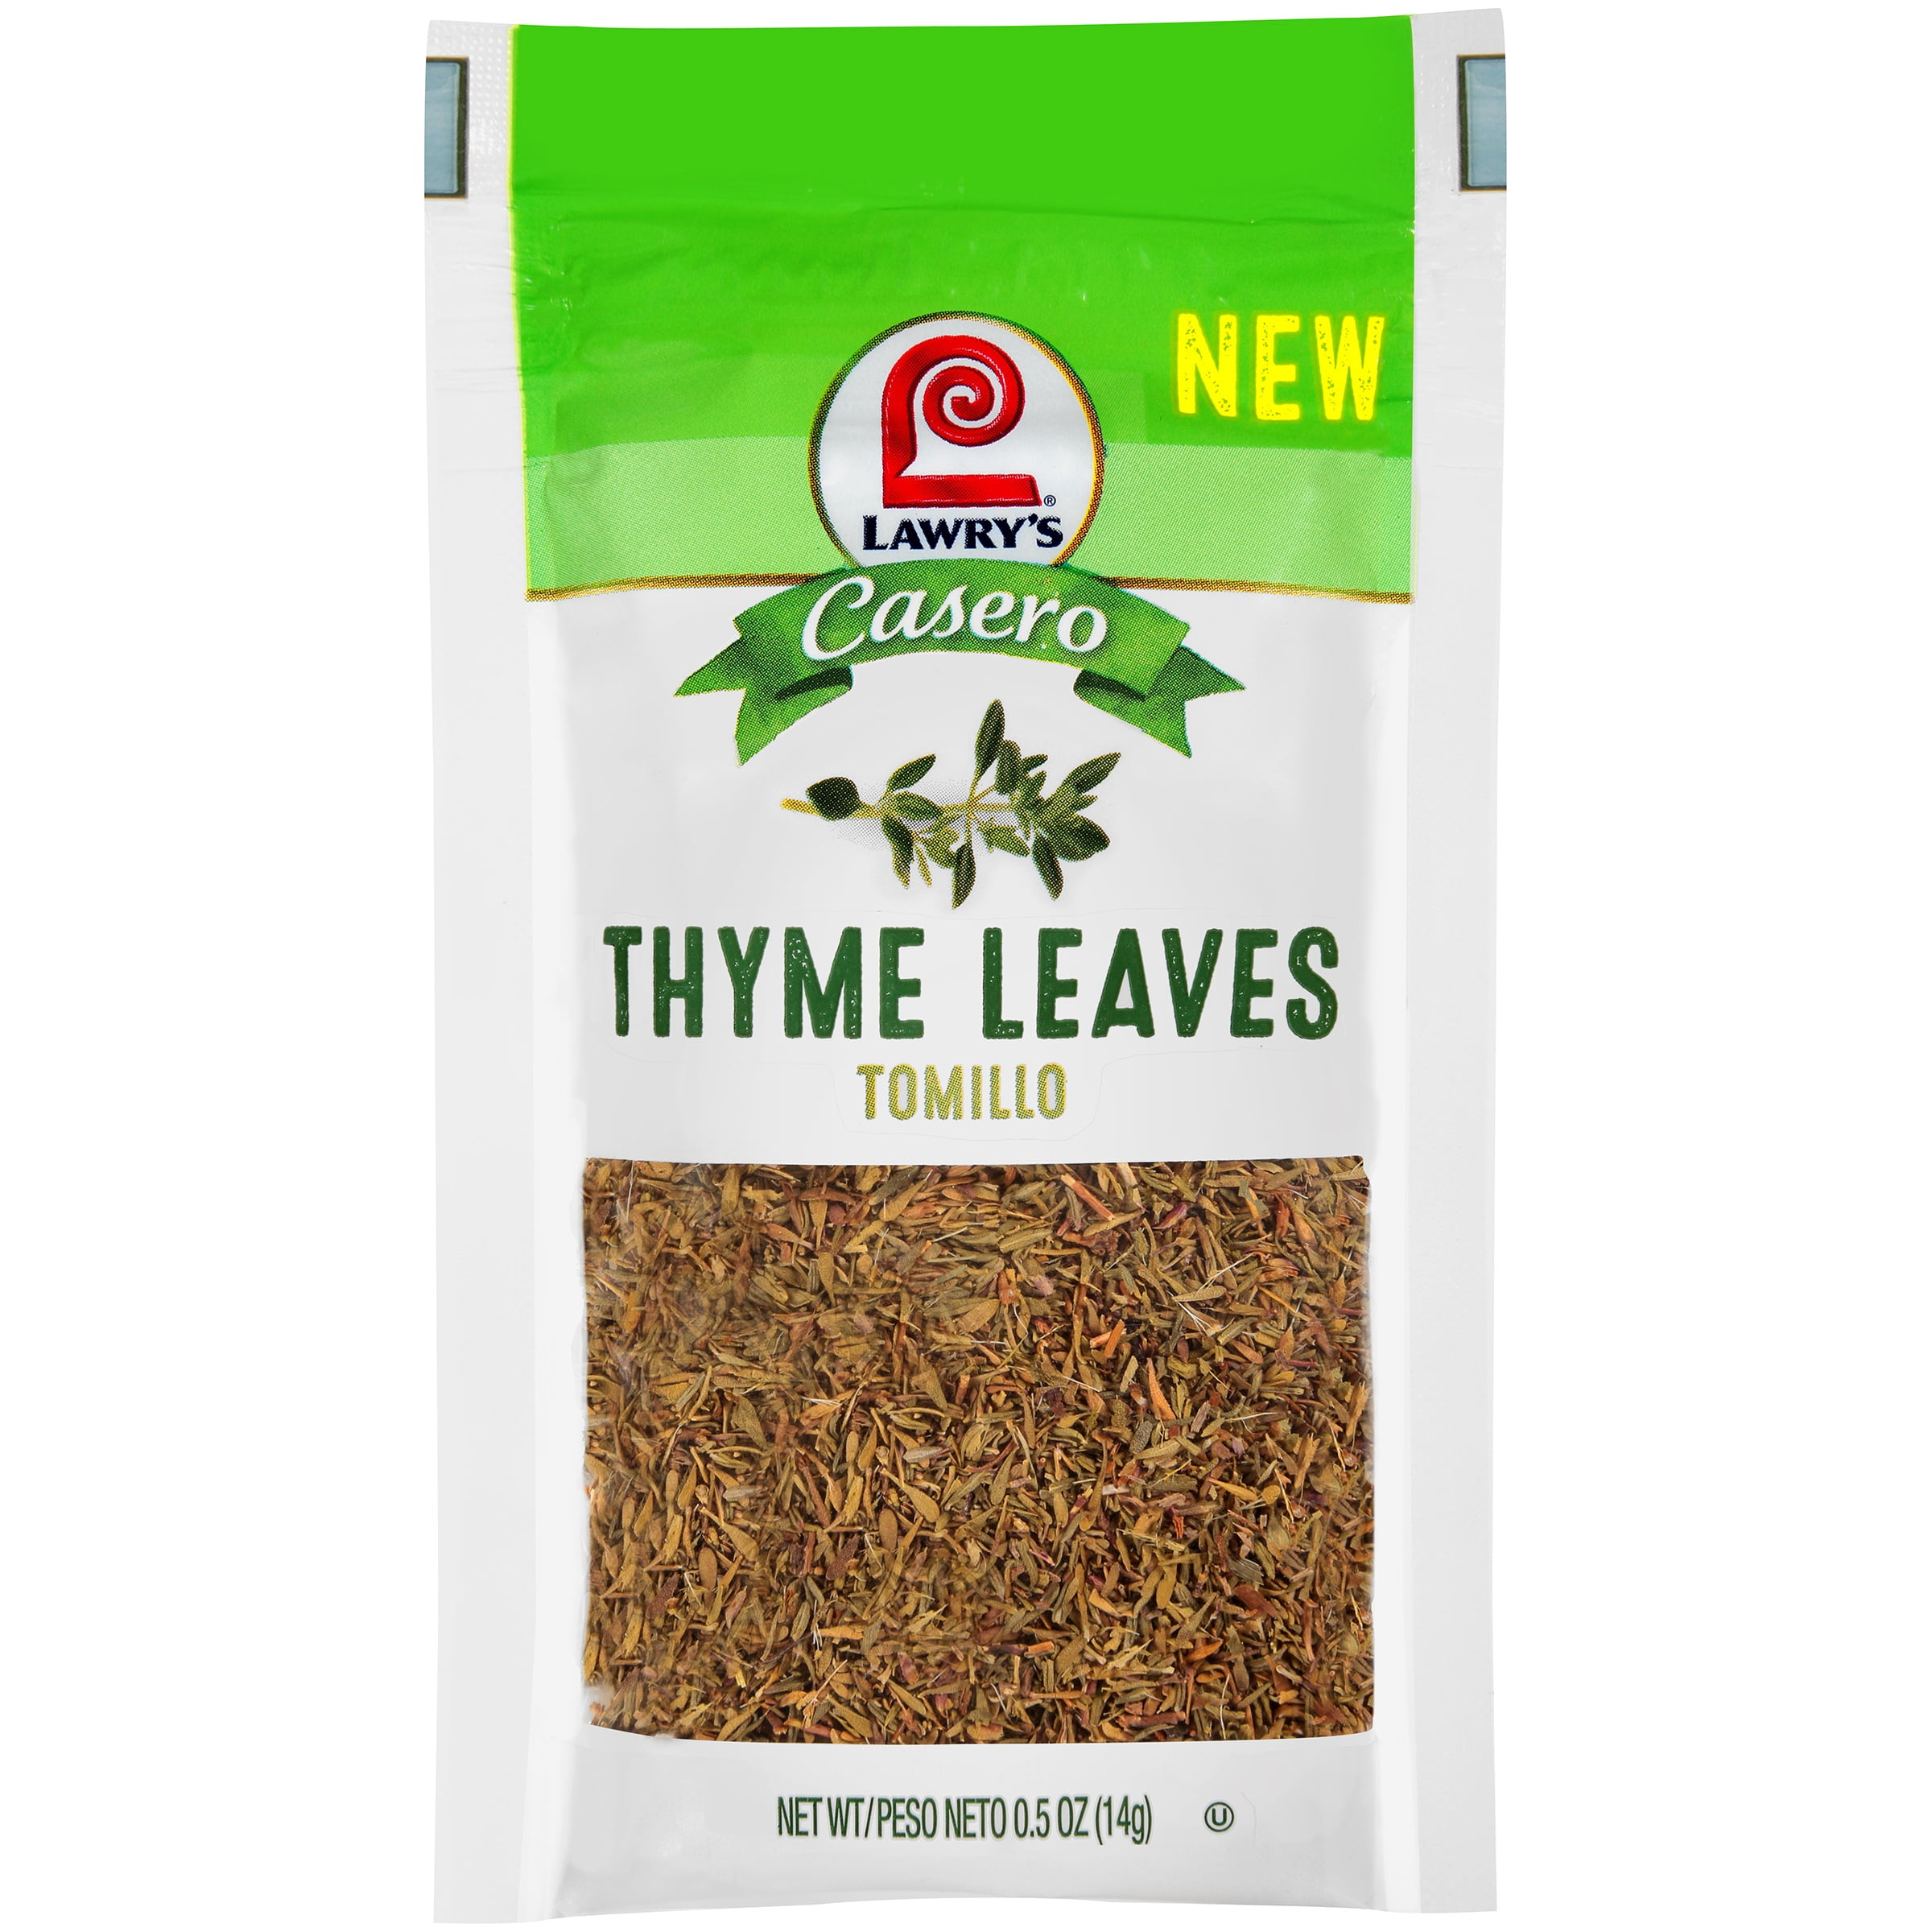 Lawry's® Casero Thyme Leaves 0.5 oz. Pouch